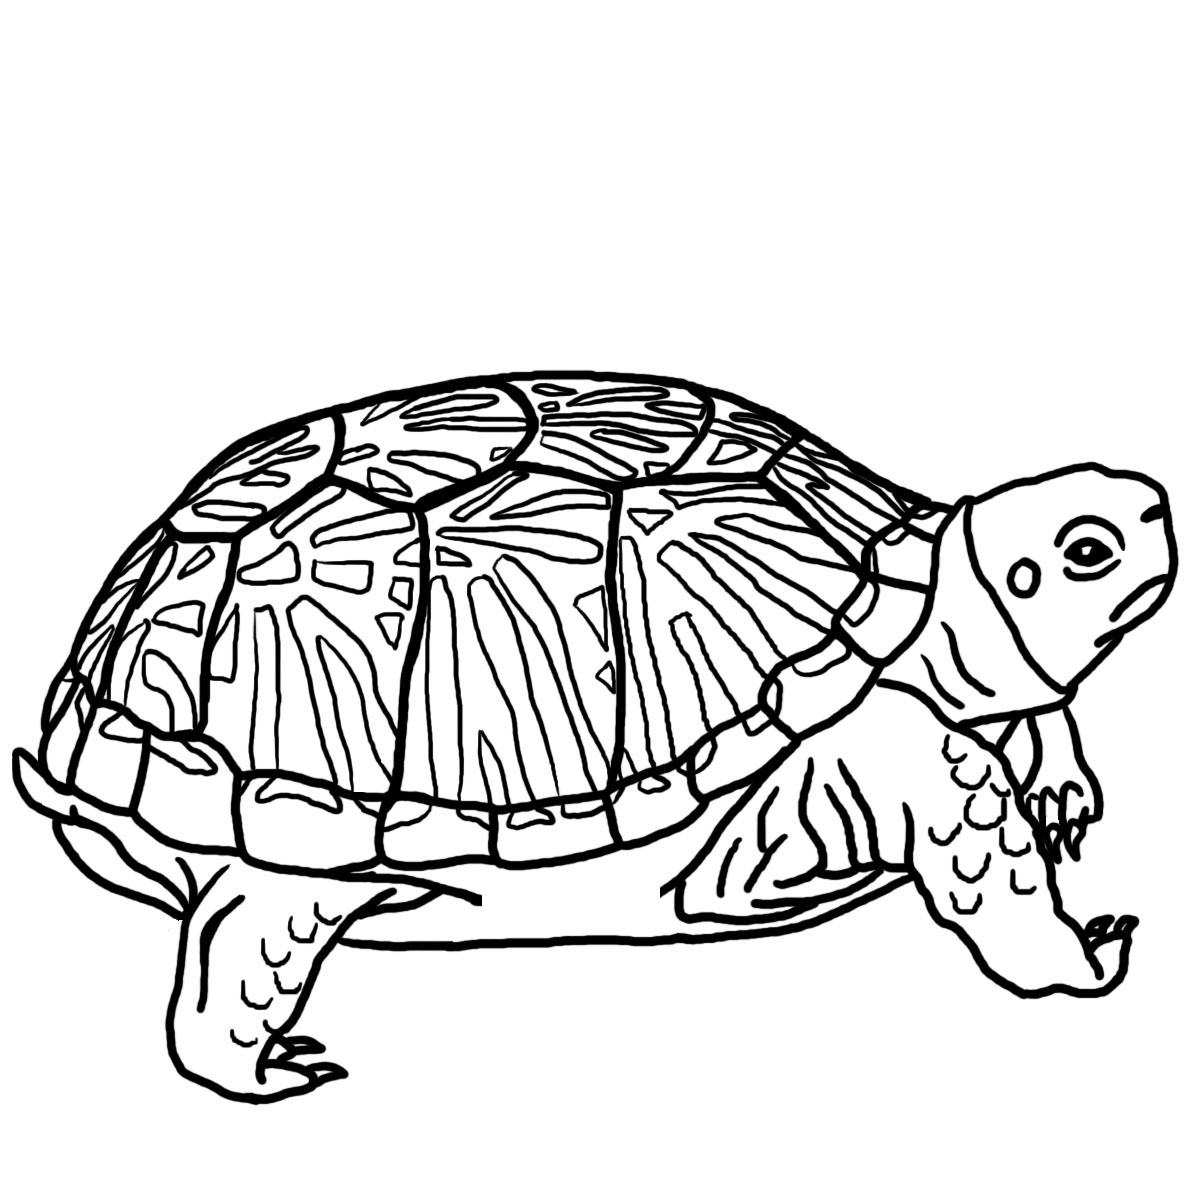 Turtle Images Free